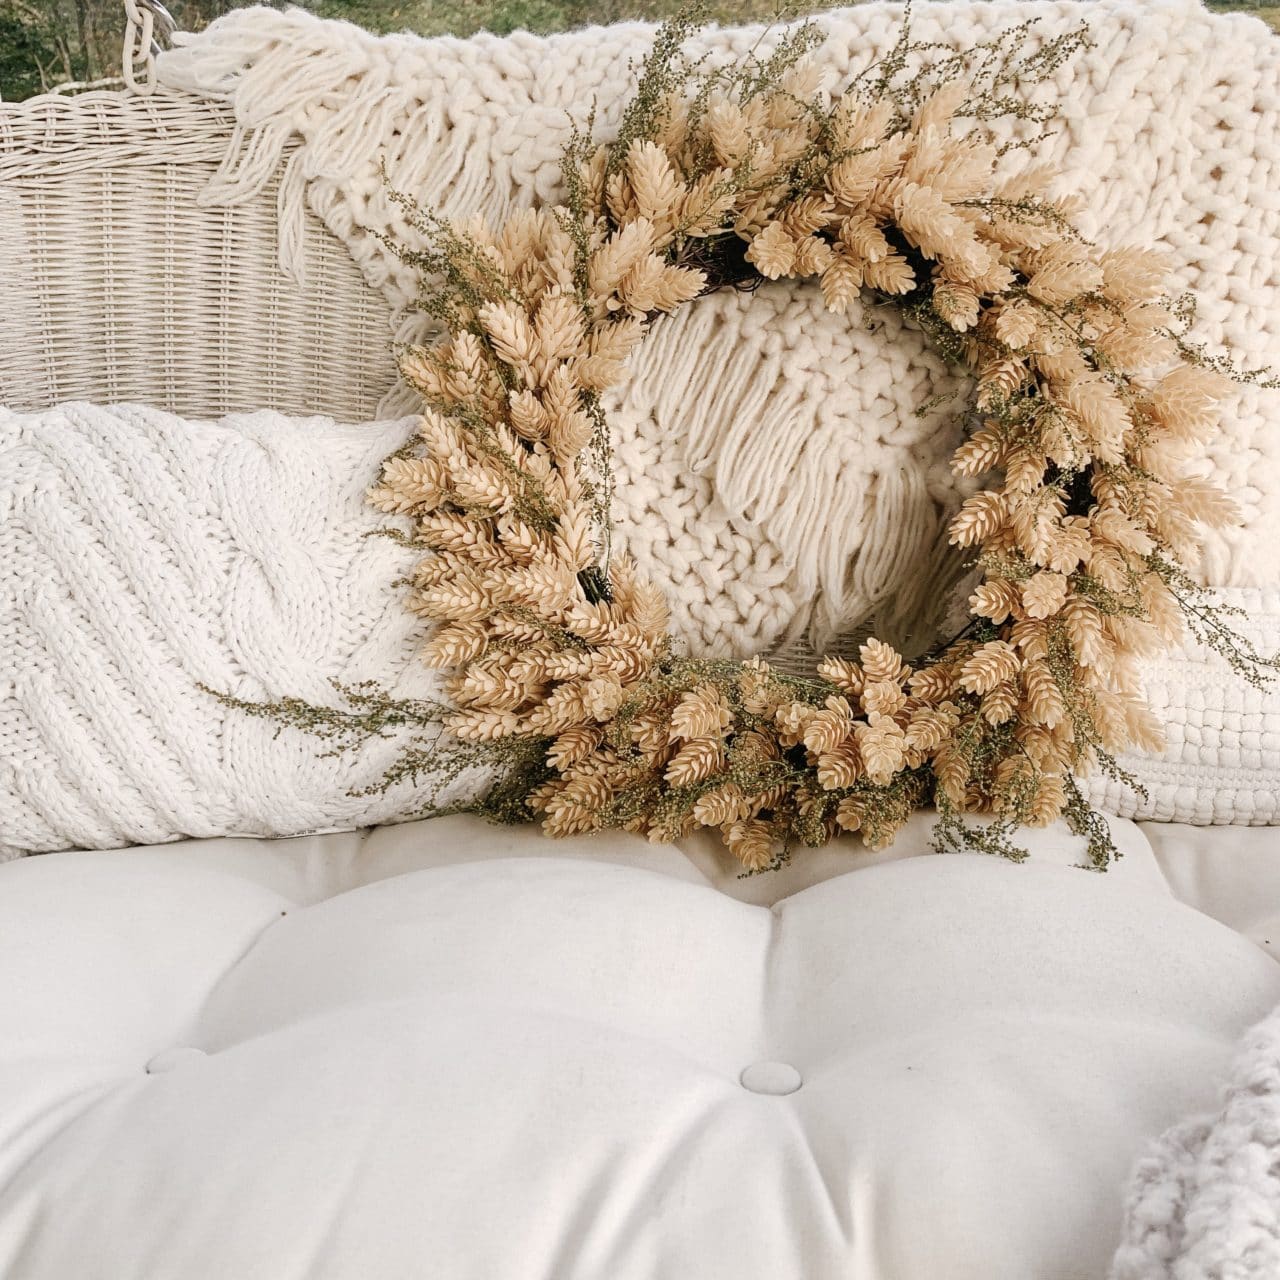 How to Make Faux Wreaths Look Realistic